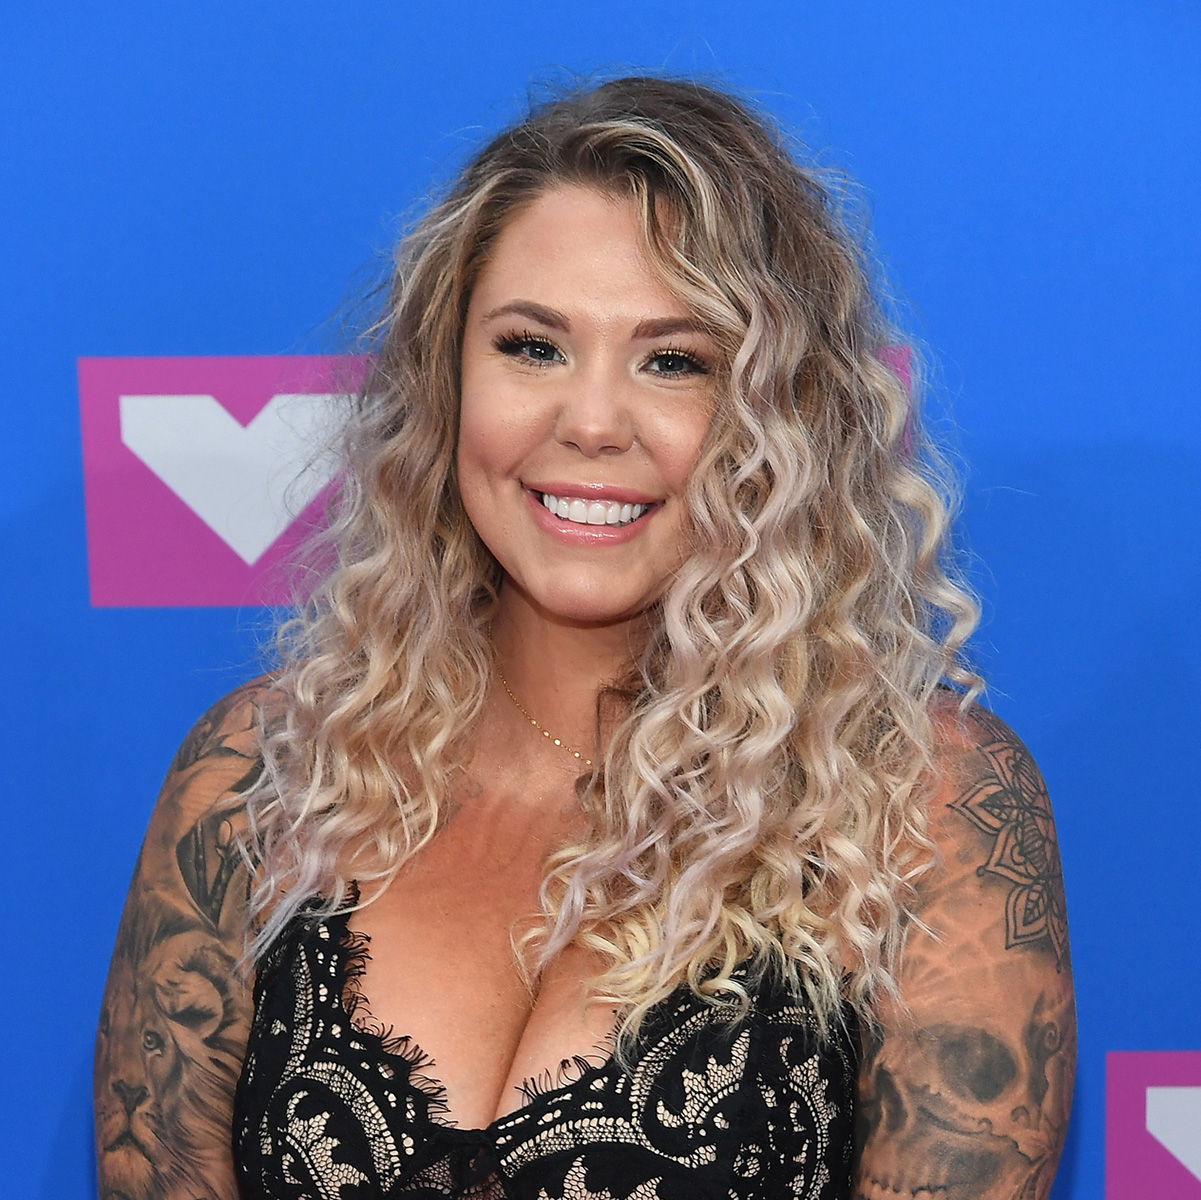 Teen Mom’s Kailyn Lowry Shares Update on Coparenting Relationships After Welcoming Twins